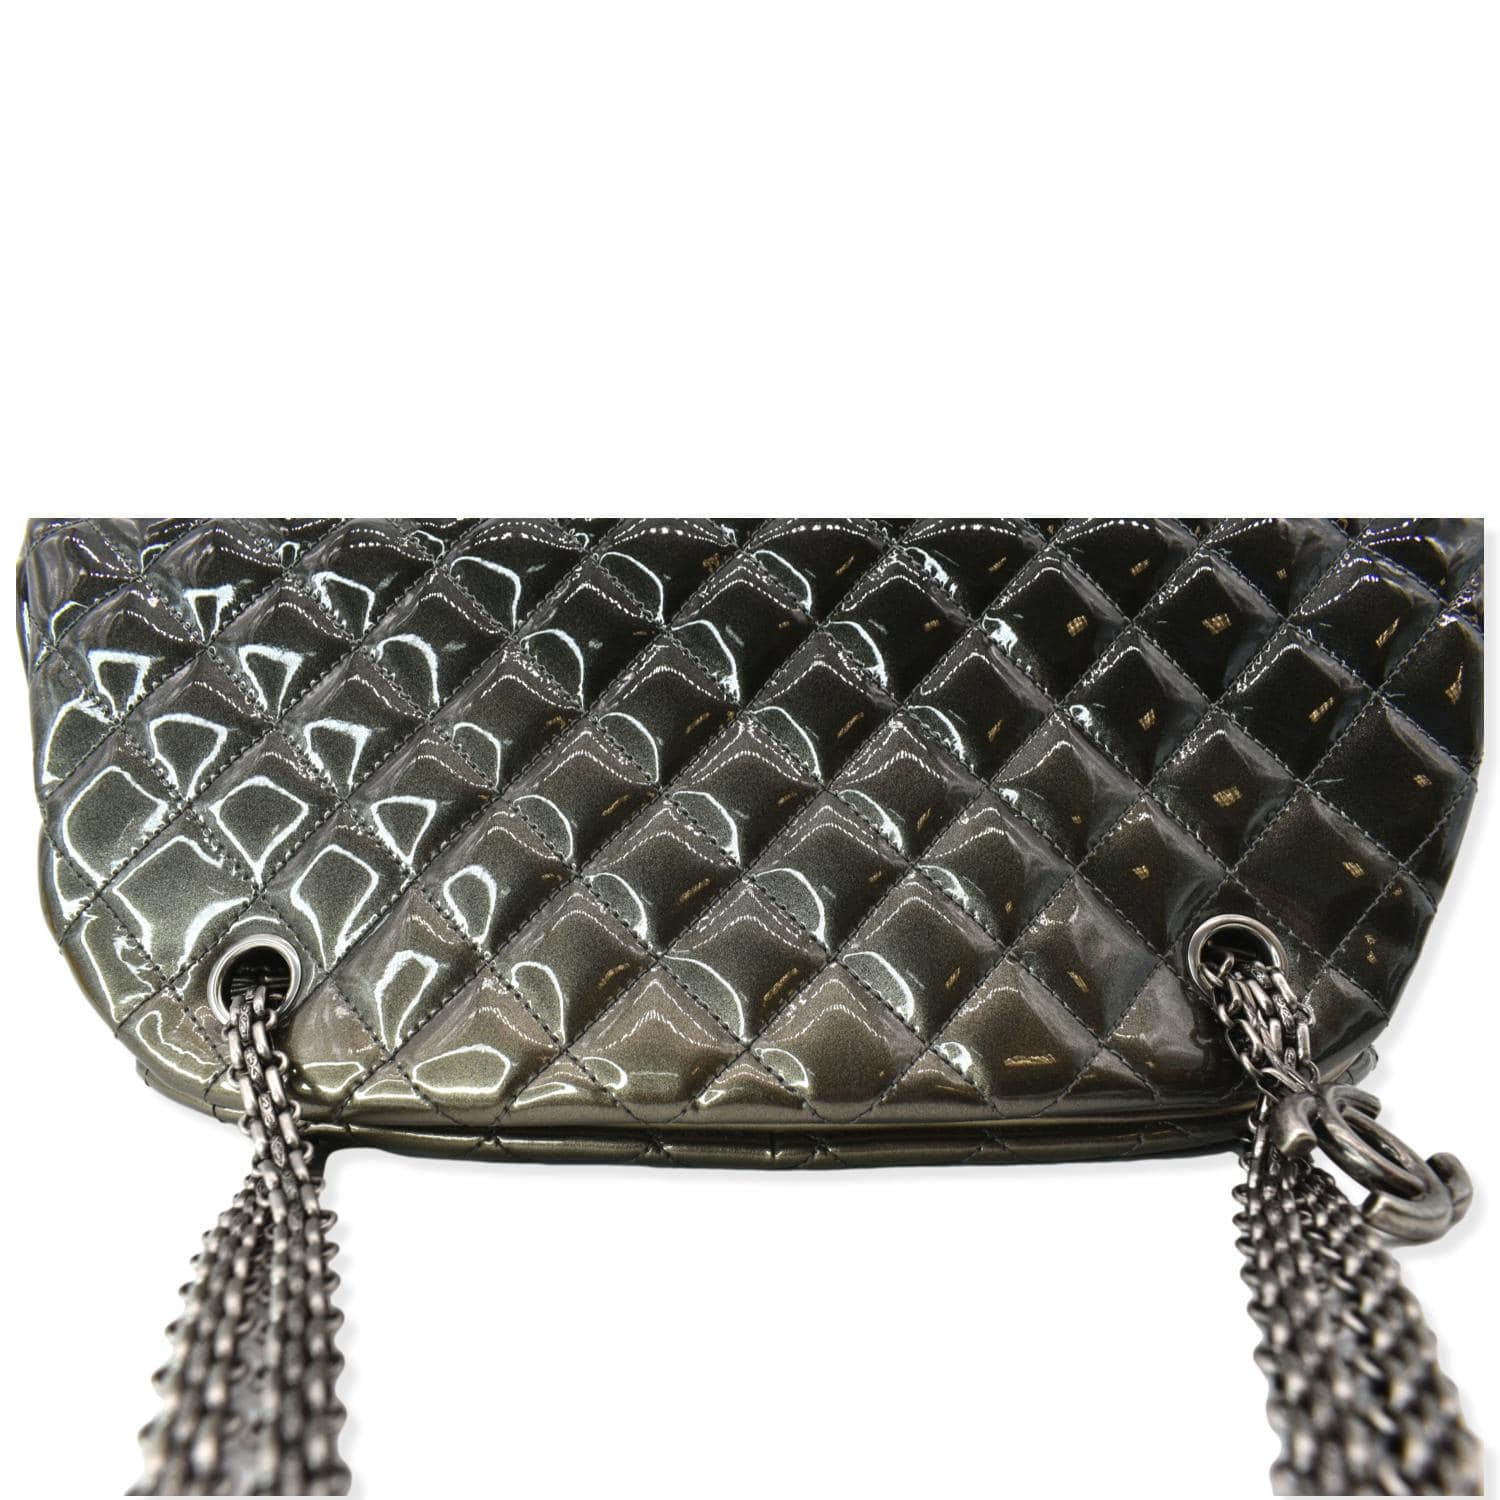 CHANEL Just Mademoiselle Ombre Degrade Patent Quilted Bowling Bag Blac